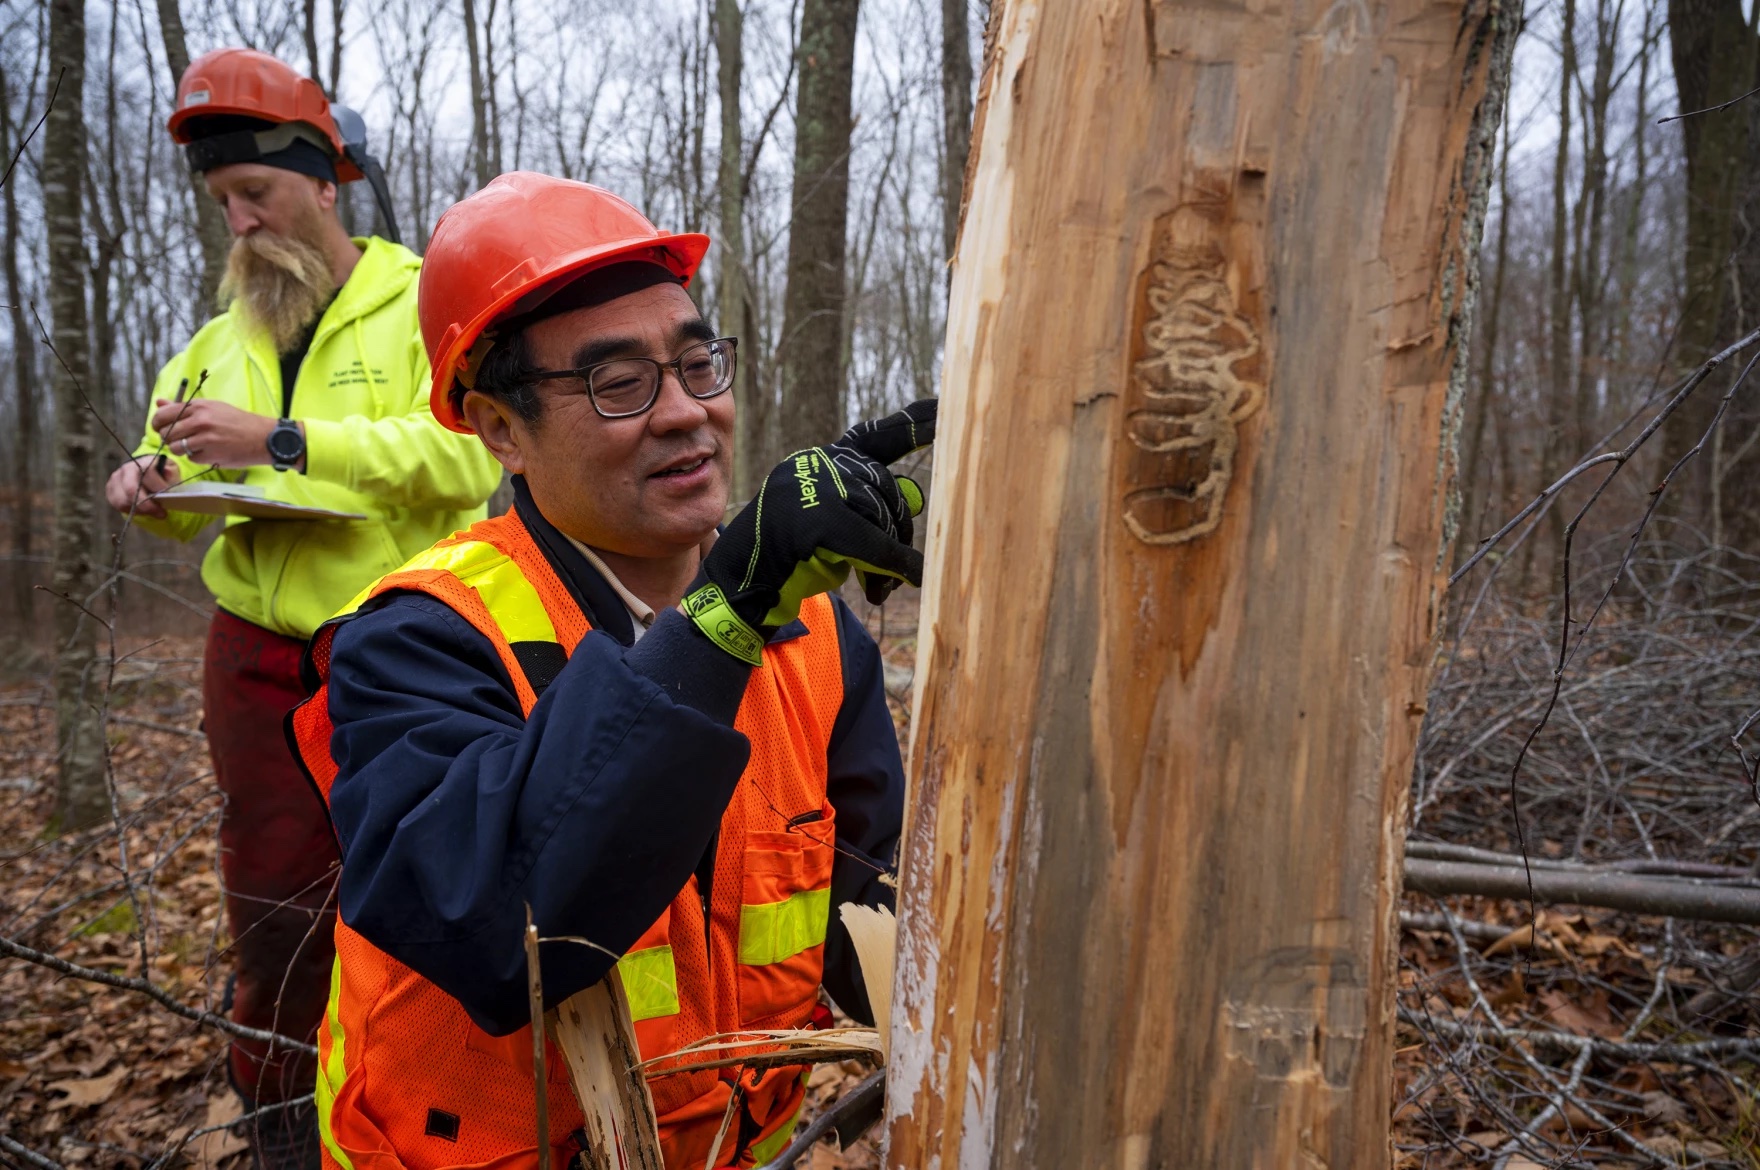 A man in a hard hat and visibility vest pointing at the trunk of a tree.